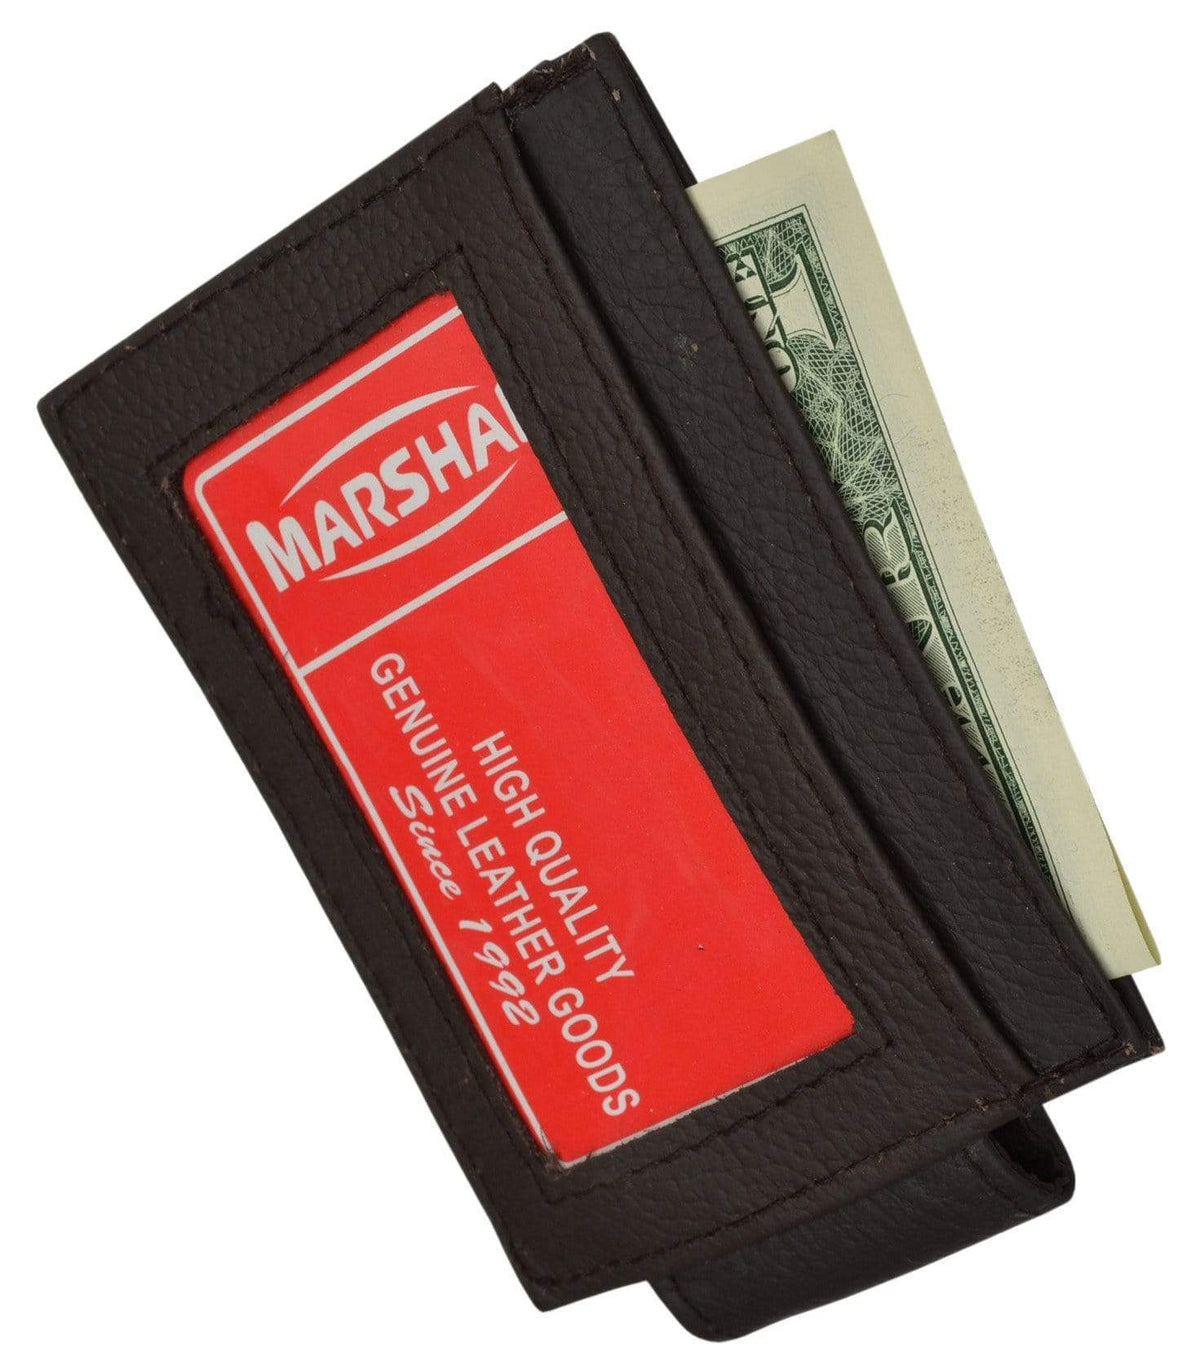 Genuine leather magnetic money clip with credit card and ID holder ...